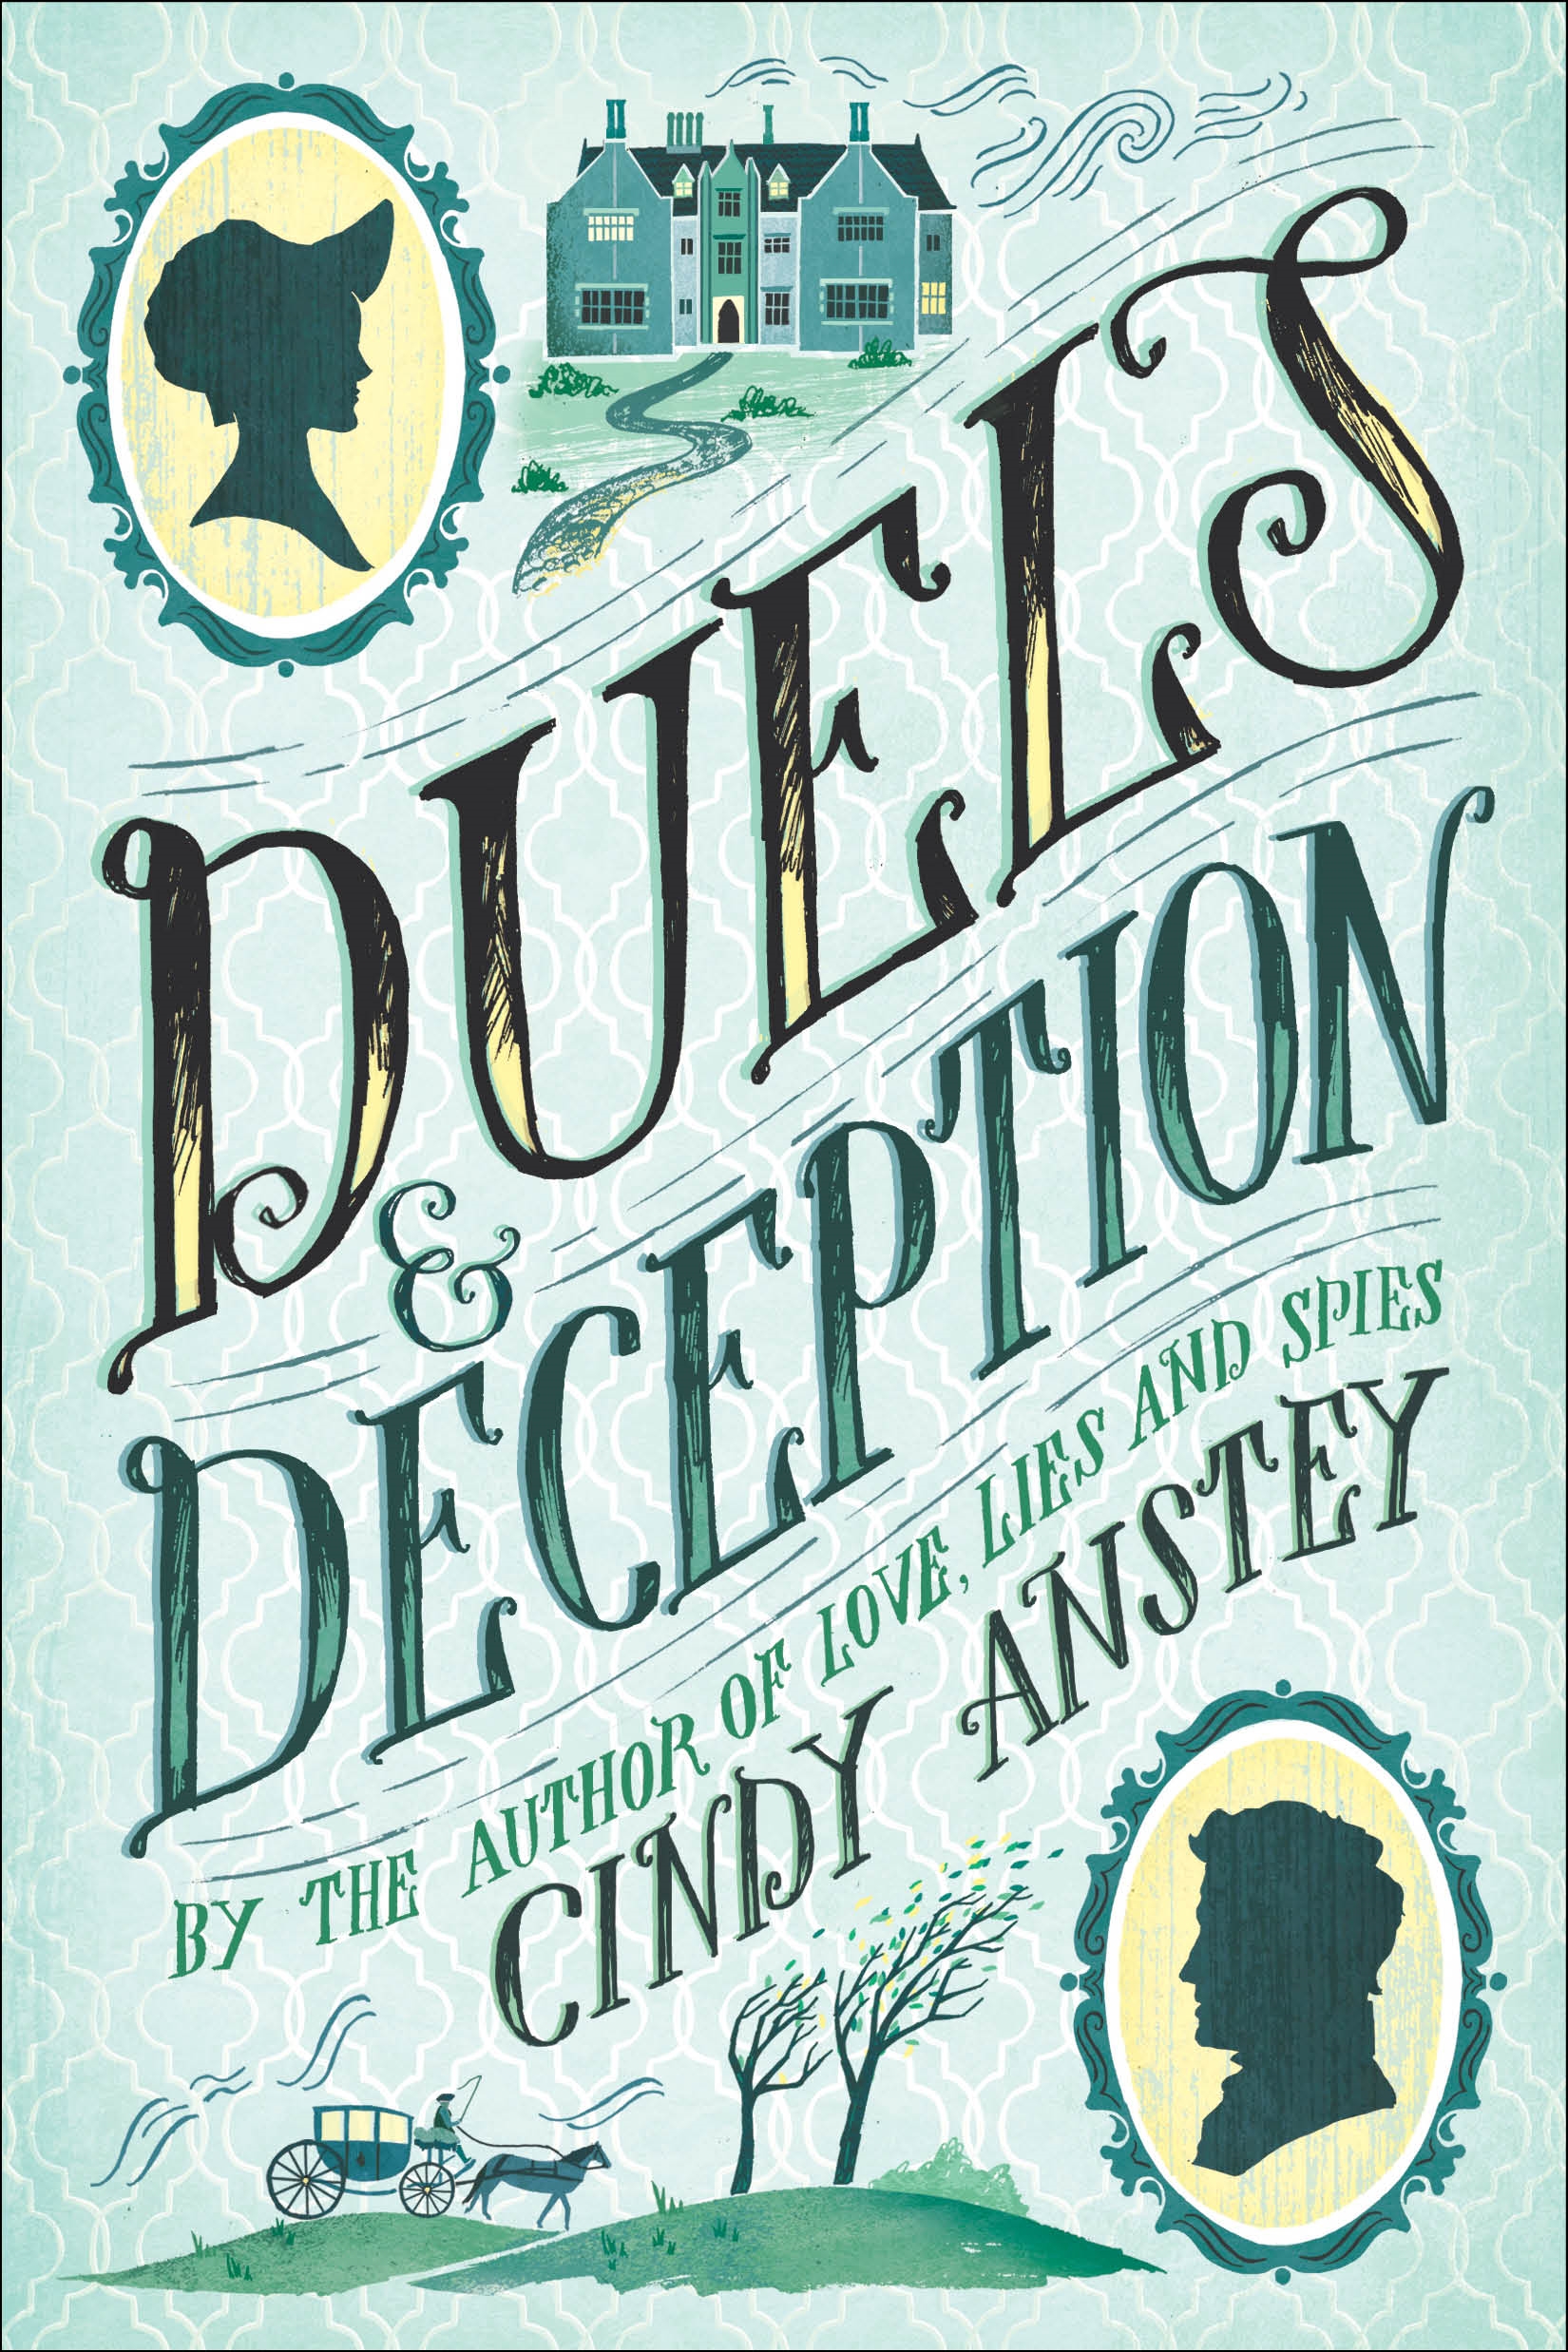 Images for Duels and Deception